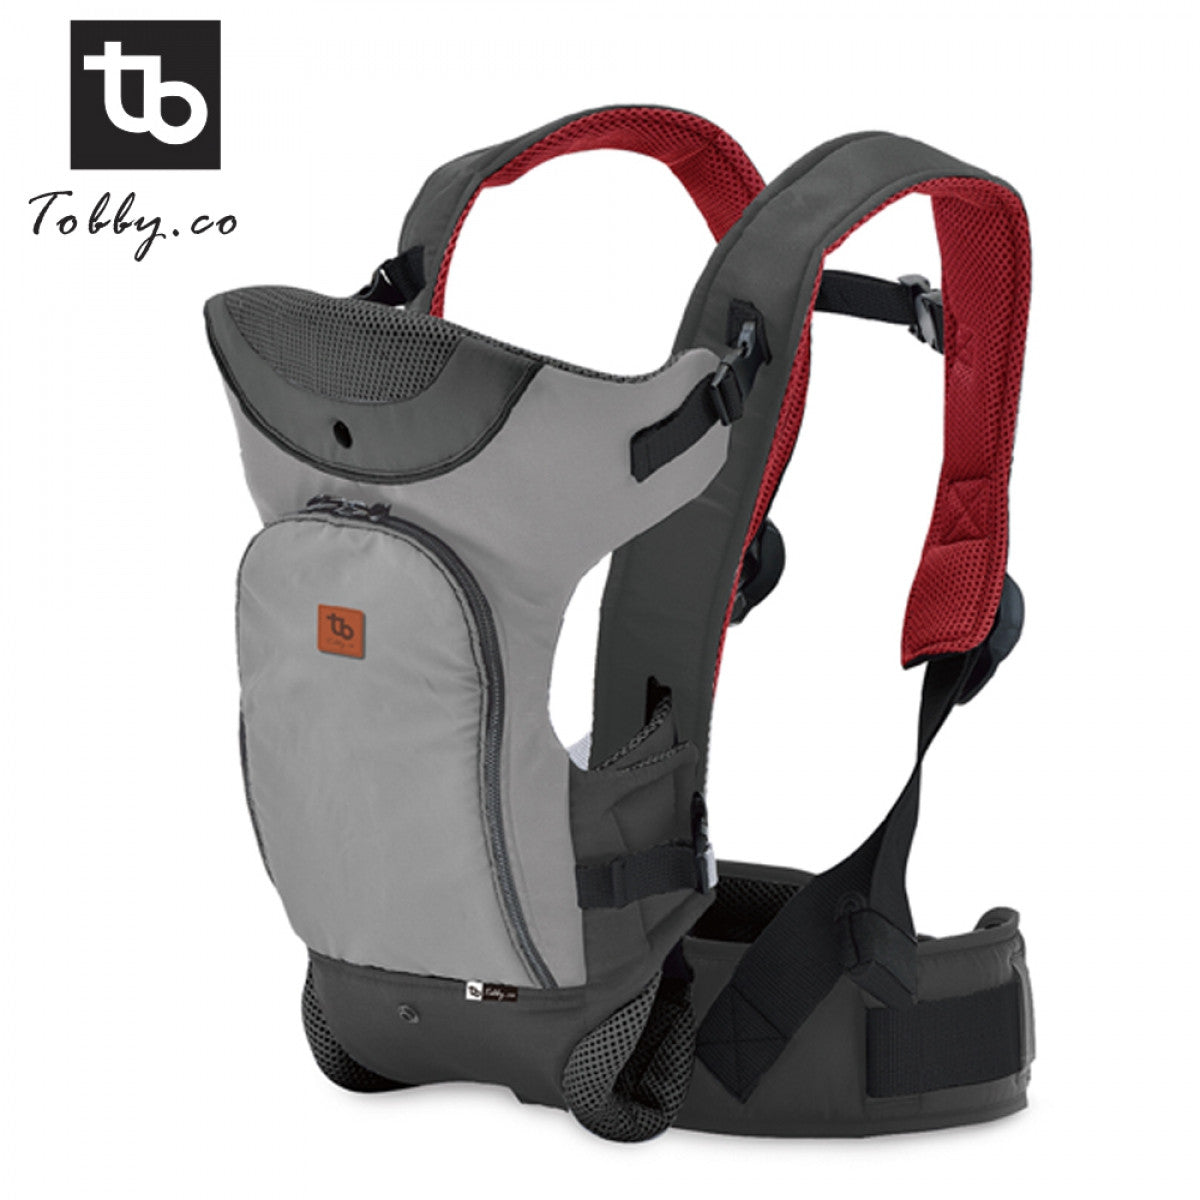 Tobby My Dear Baby Soft Carrier 28035 With Adjustable Straps. Storage Pockets & Window Mesh Design